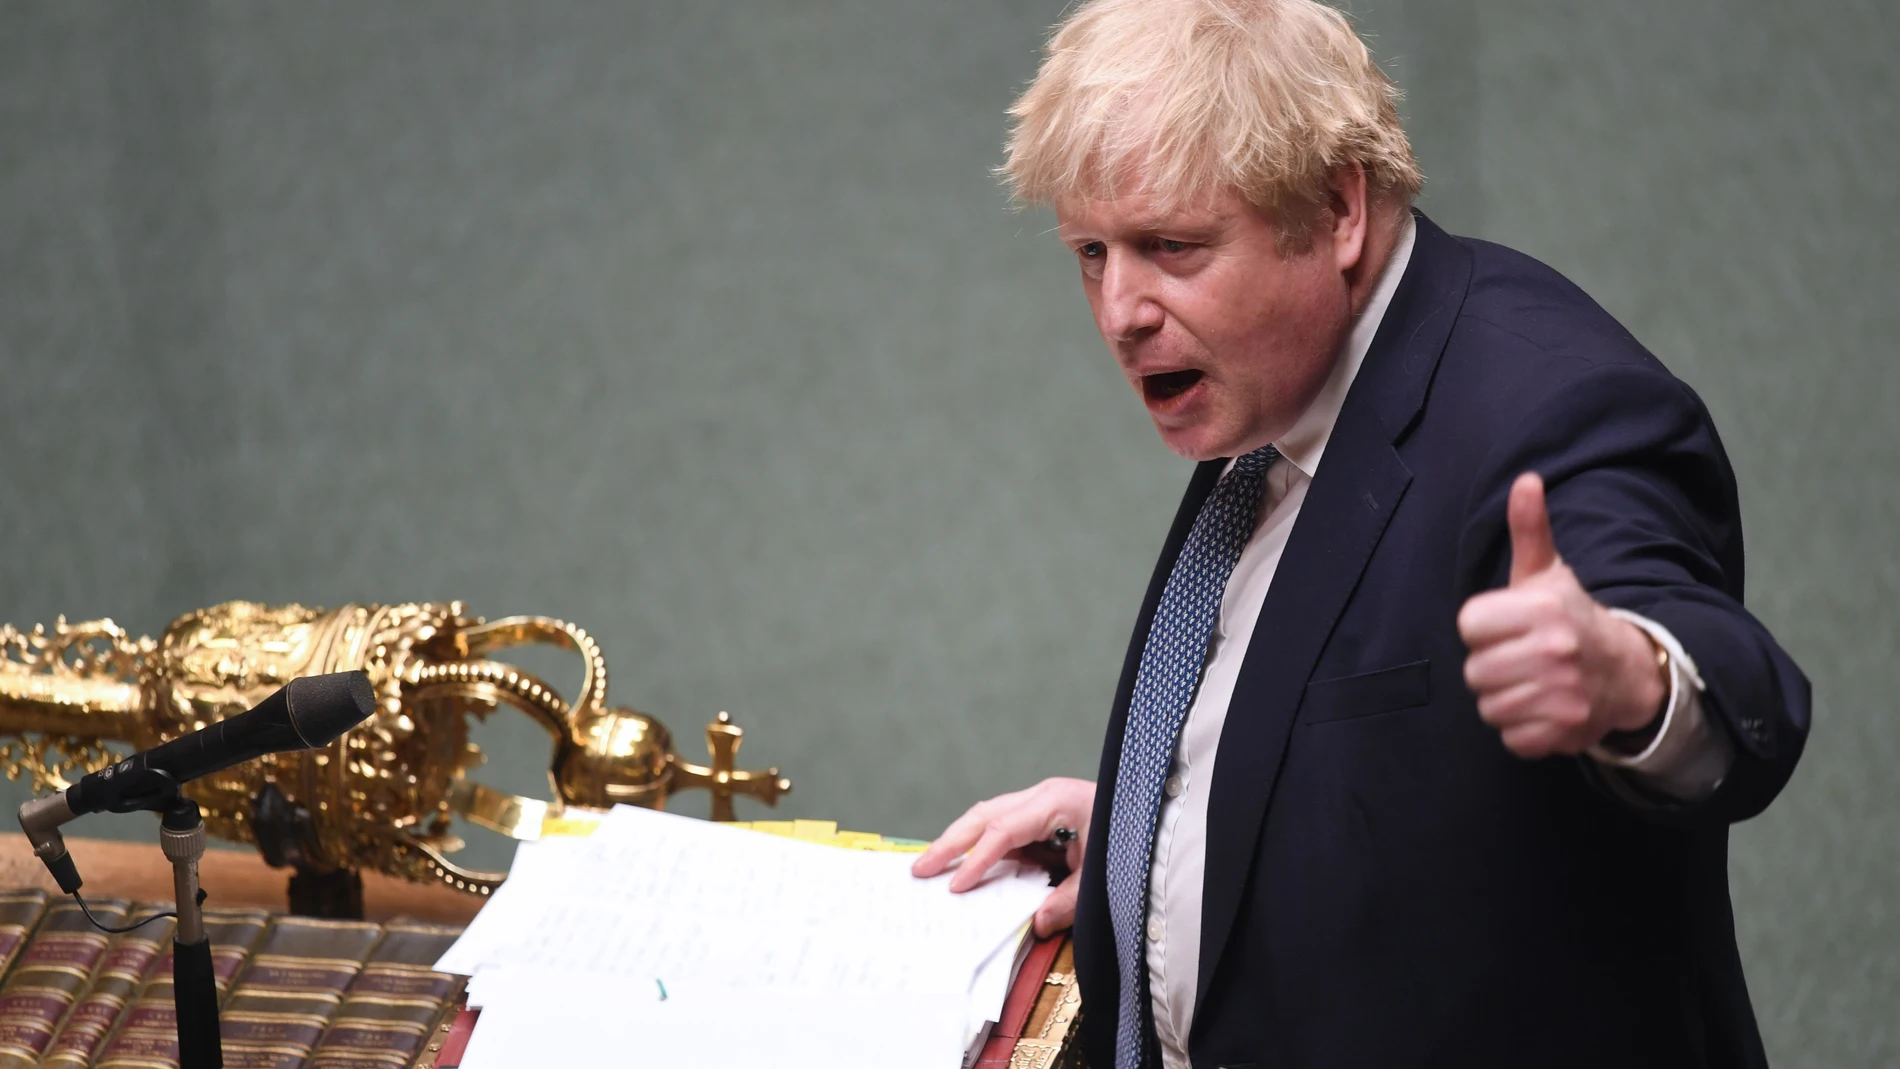 London (United Kingdom), 02/02/2022.- A handout photograph released by the UK Parliament shows British Prime Minister Boris Johnson during the Prime Minister's Questions (PMQs) at the House of Commons in London, Britain, 02 February 2022. Johnson is facing increased calls to resign over the Downing Street 'partygate' allegations. (Reino Unido, Londres) EFE/EPA/UK PARLIAMENT/JESSICA TAYLOR HANDOUT -- MANDATORY CREDIT: UK PARLIAMENT/JESSICA TAYLOR -- HANDOUT EDITORIAL USE ONLY/NO SALES